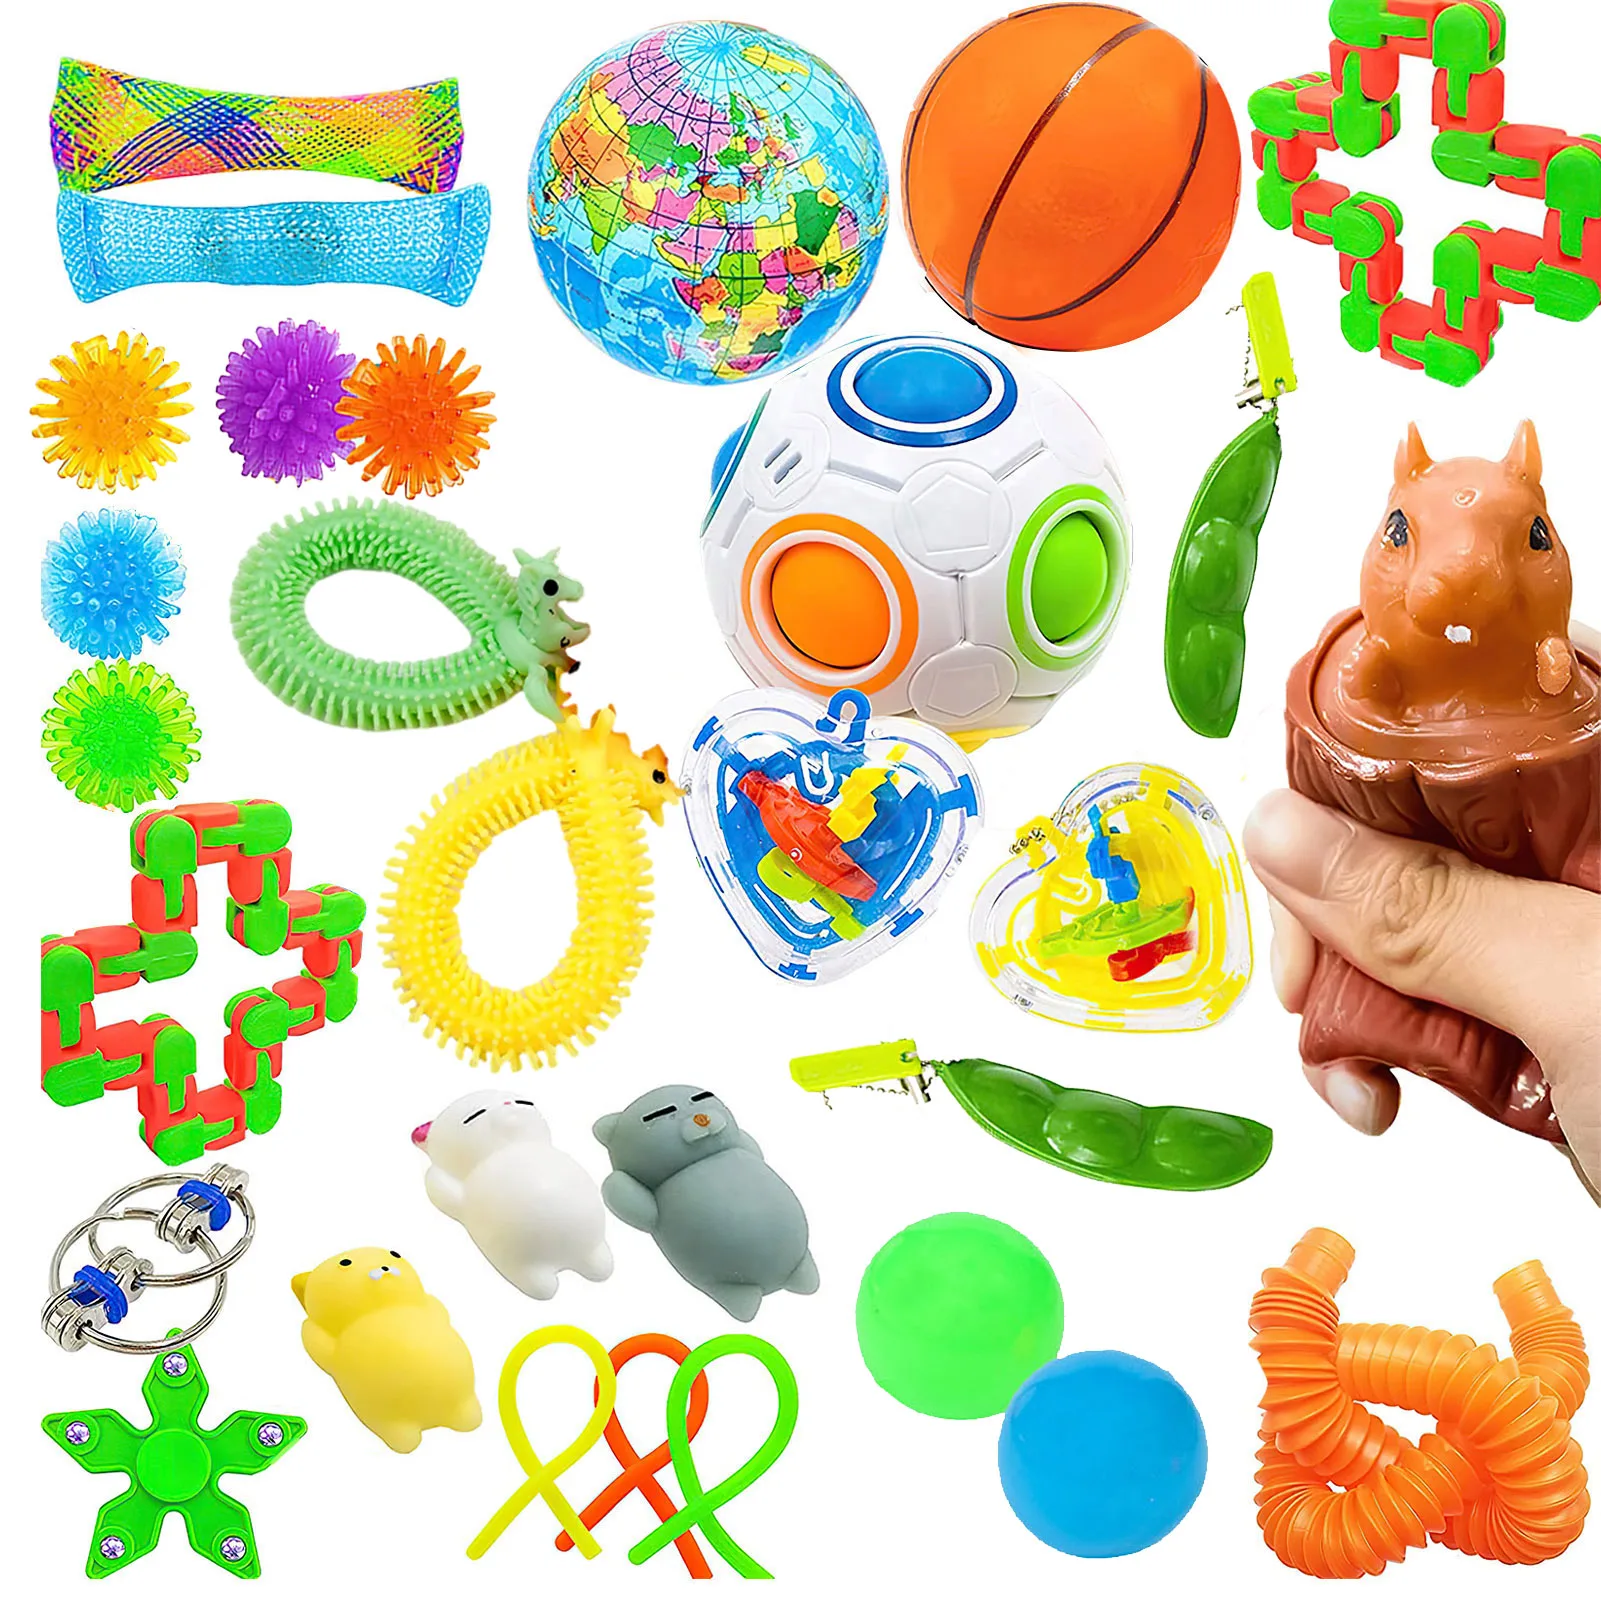 

30pcs Sensory Toys Set For Children Bubble Figet Toy Rainbow Pack Anti Stress Relief Toy Maze Ball Infinity Cube Squishy Toy Box